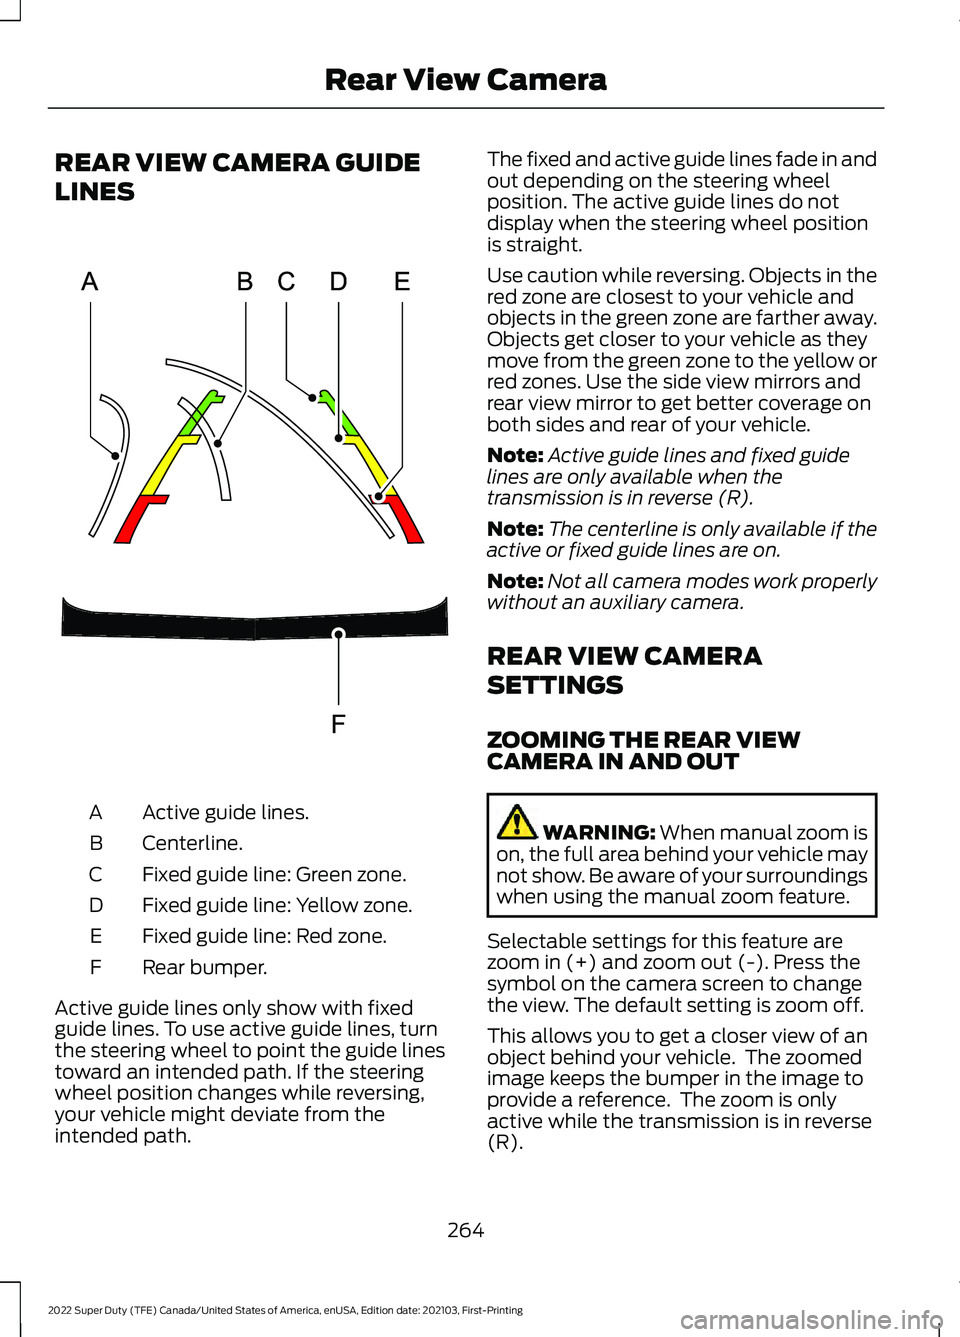 FORD F-250 2022  Owners Manual REAR VIEW CAMERA GUIDE
LINES
Active guide lines.
A
Centerline.
B
Fixed guide line: Green zone.
C
Fixed guide line: Yellow zone.
D
Fixed guide line: Red zone.
E
Rear bumper.
F
Active guide lines only s